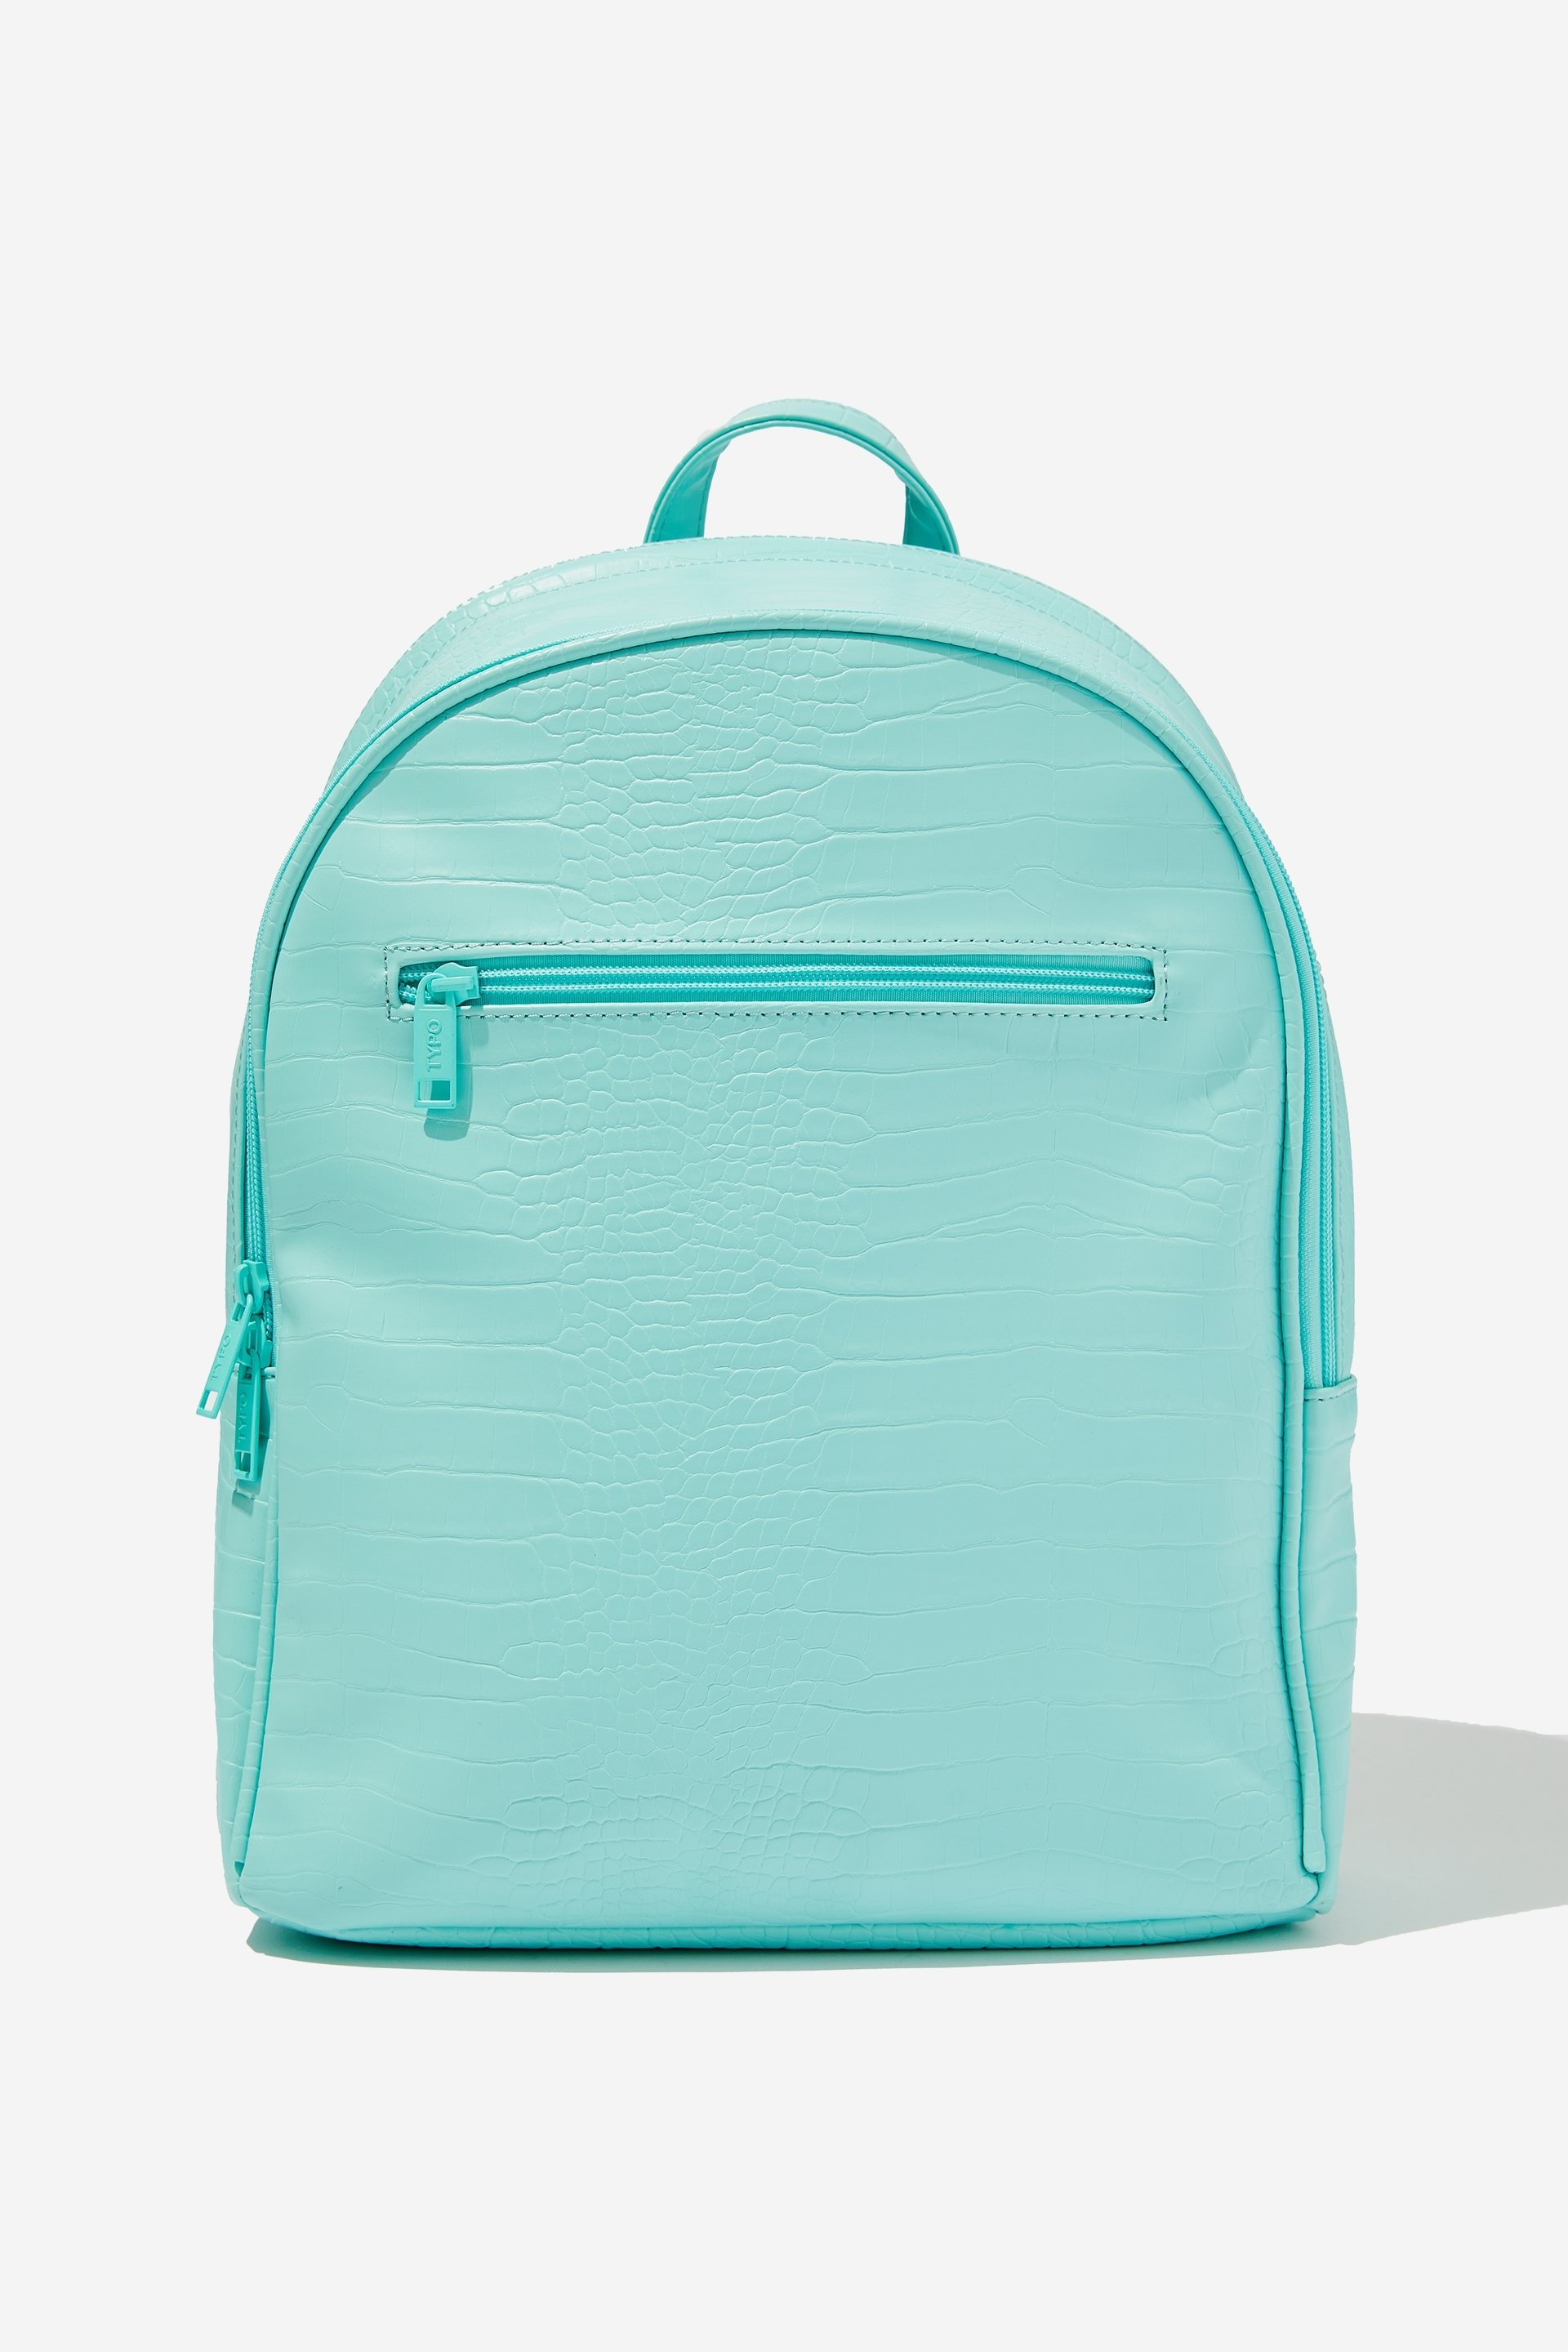 Typo - Off The Grid Travel Backpack - Minty skies croc